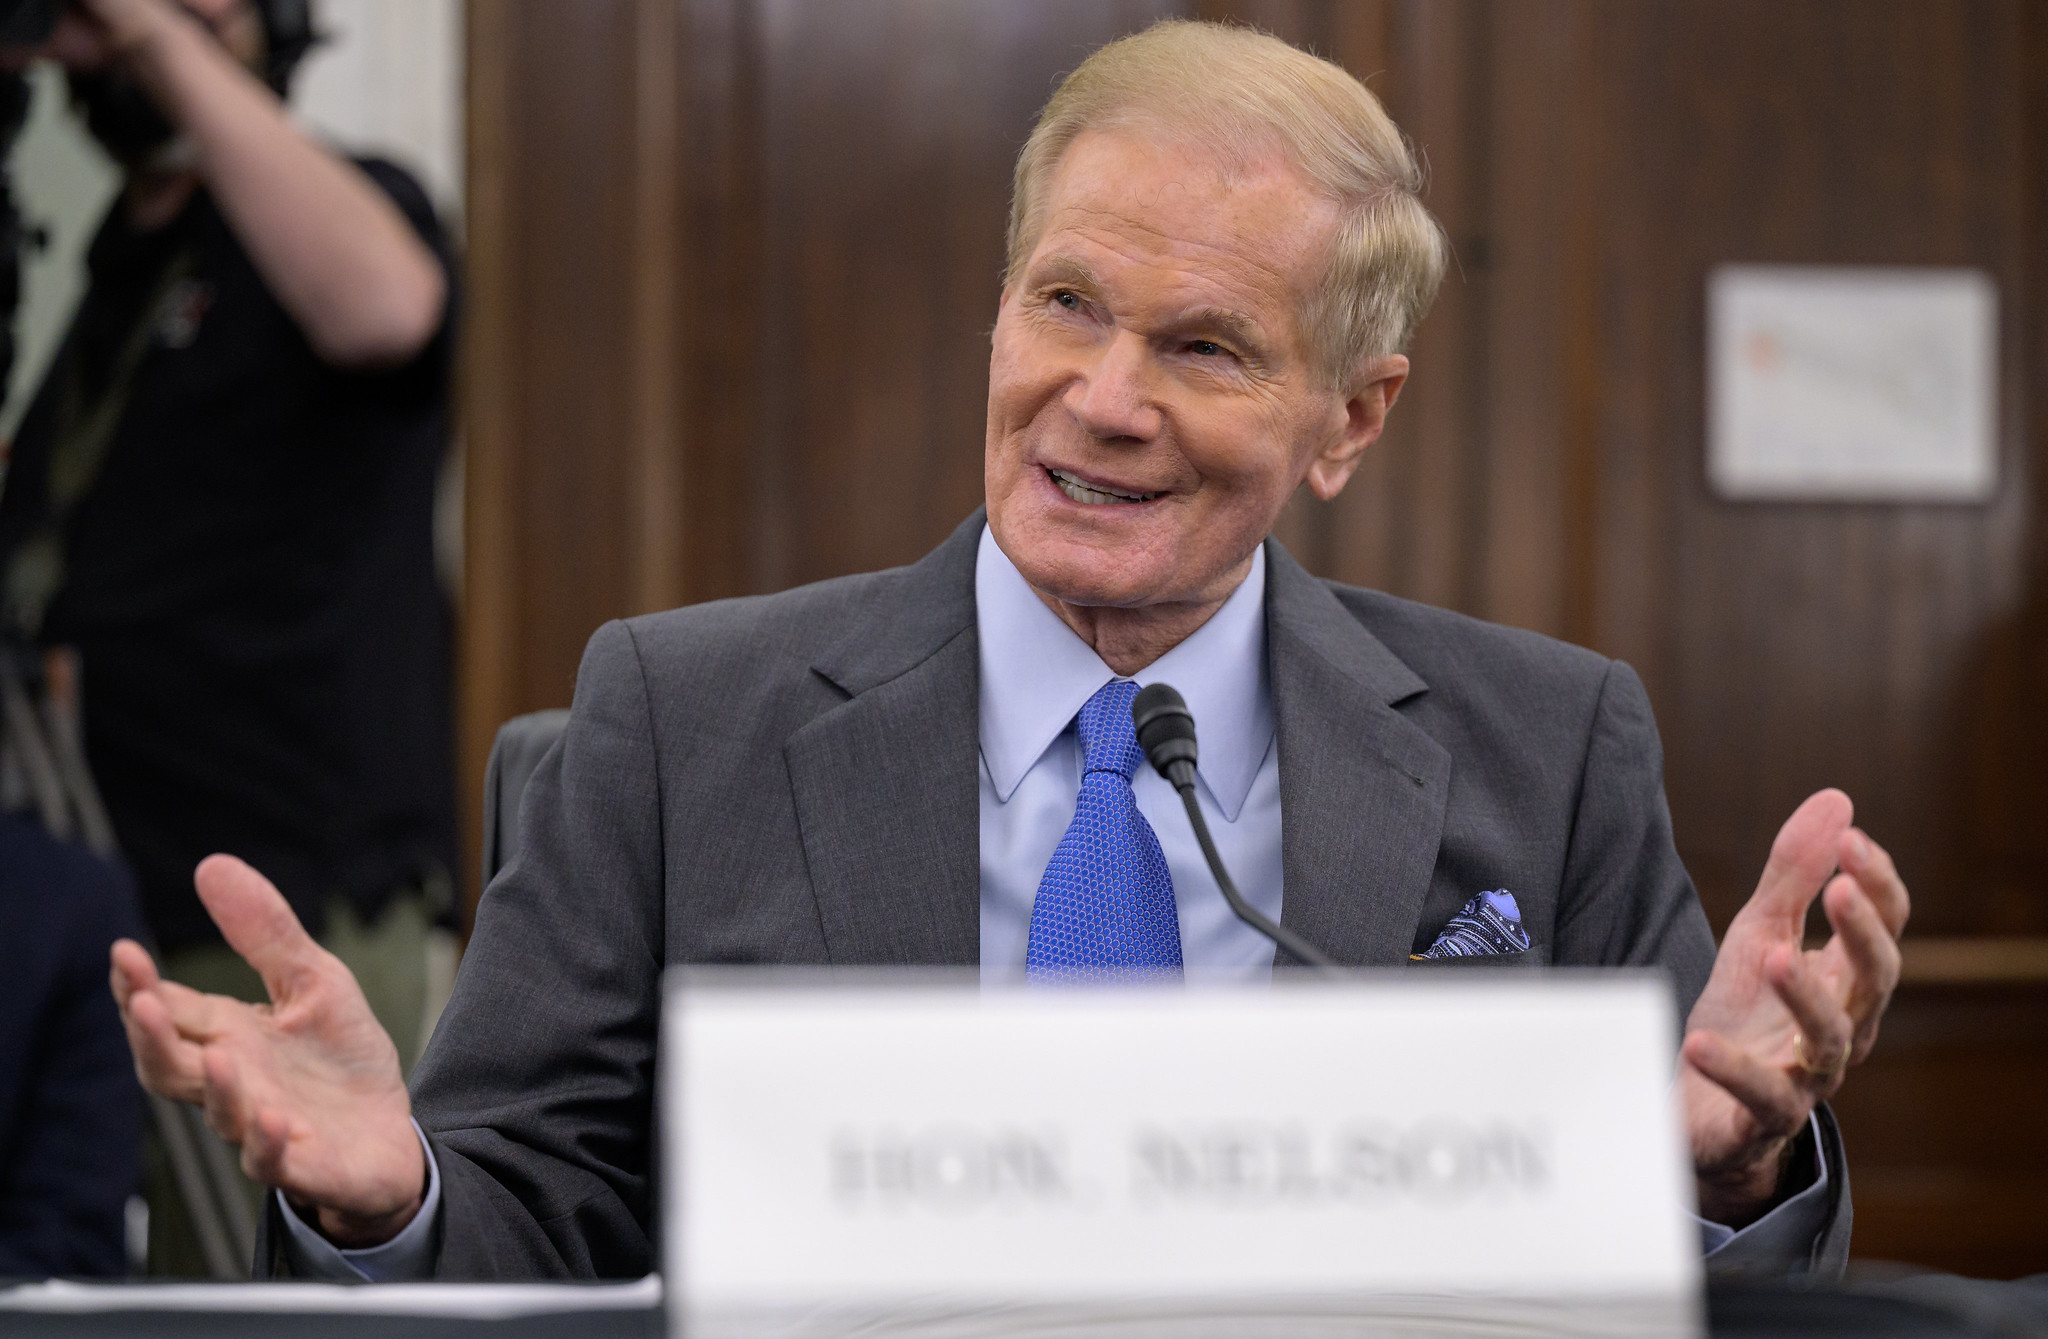 This image shows Bill Nelson, former U.S. senator and confirmed NASA administrator, smiling with his hands open while seated at the table before the Senate Committee on Commerce, Science, and Transportation. He is wearing a gray suit, blue shirt and tie.